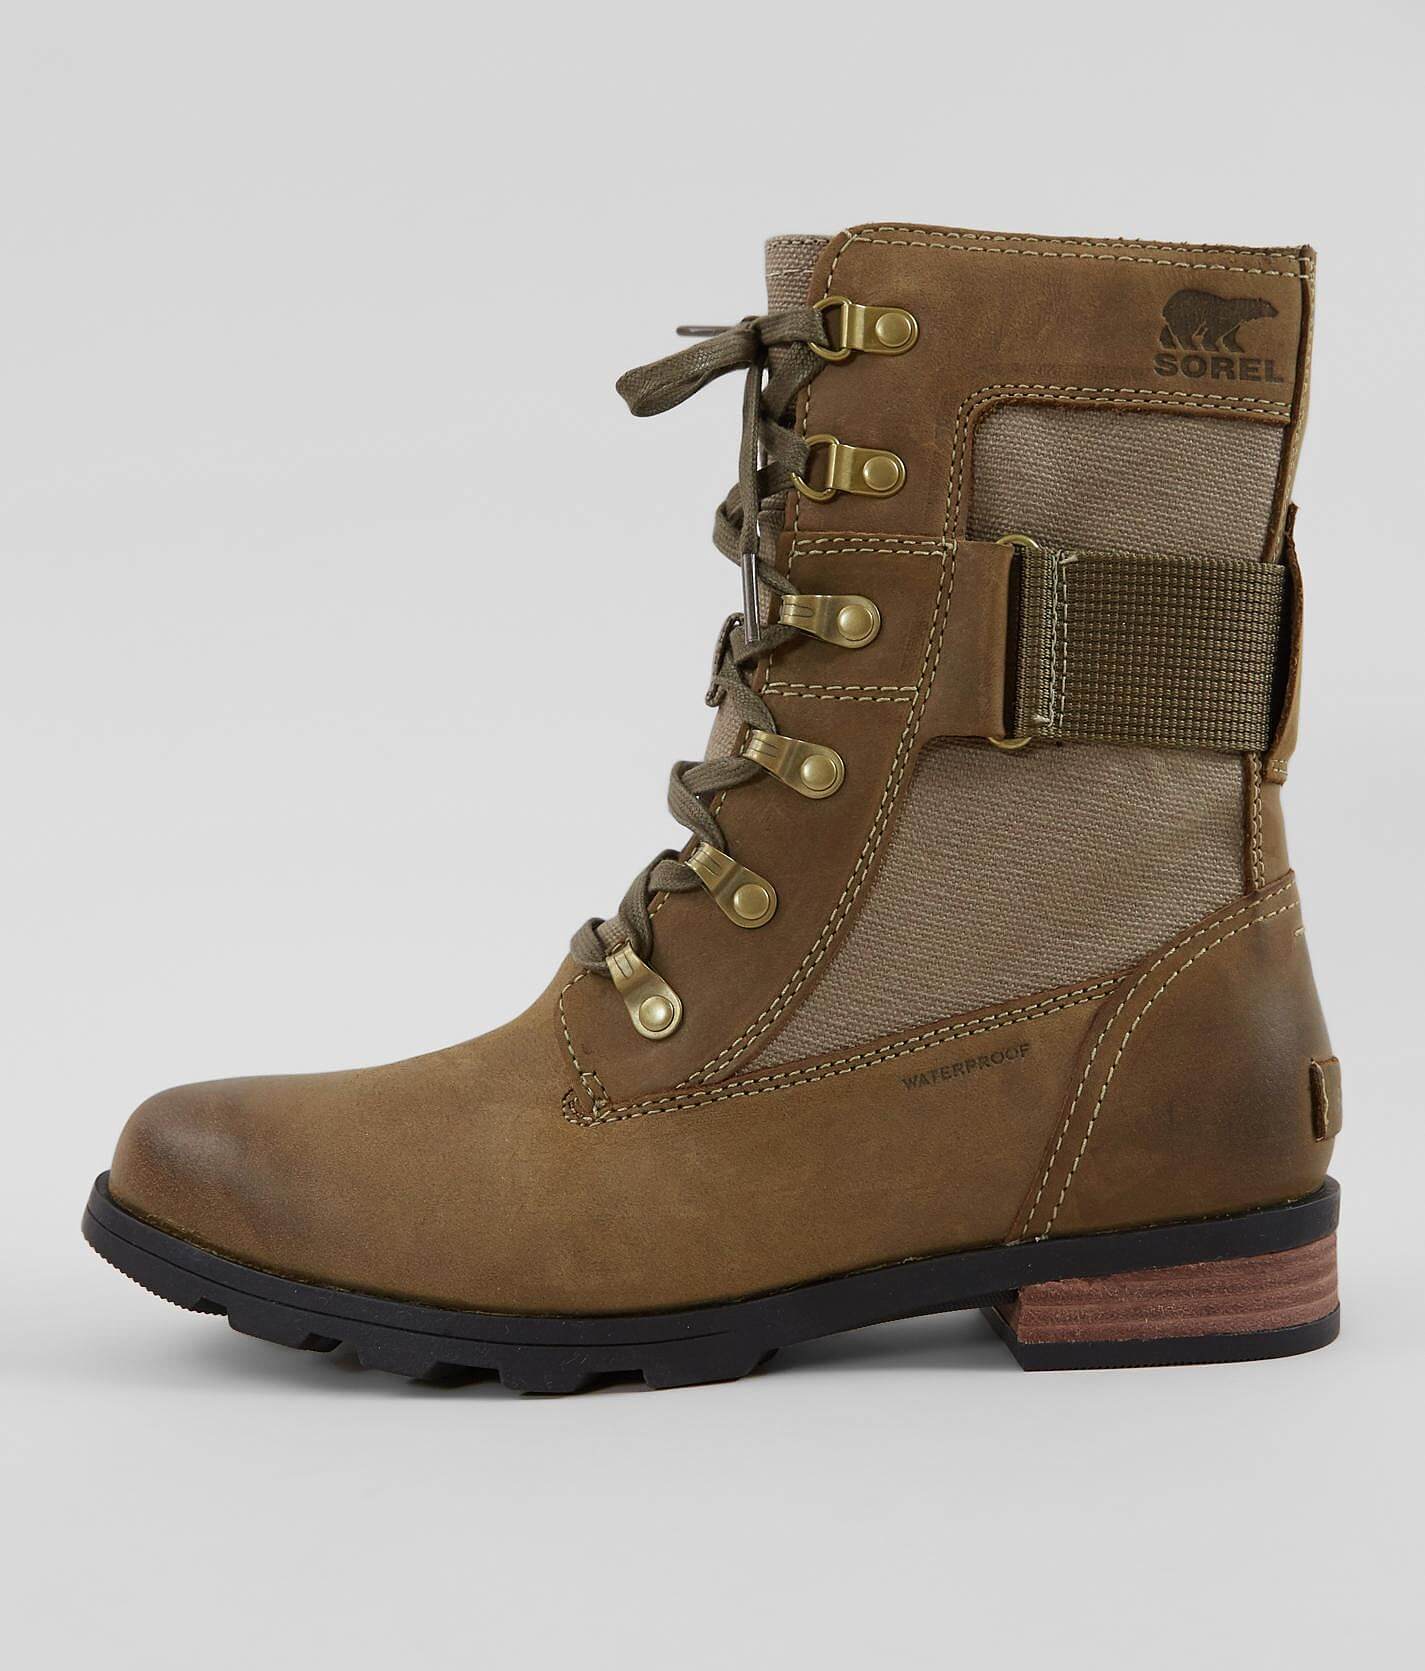 emelie conquest boot